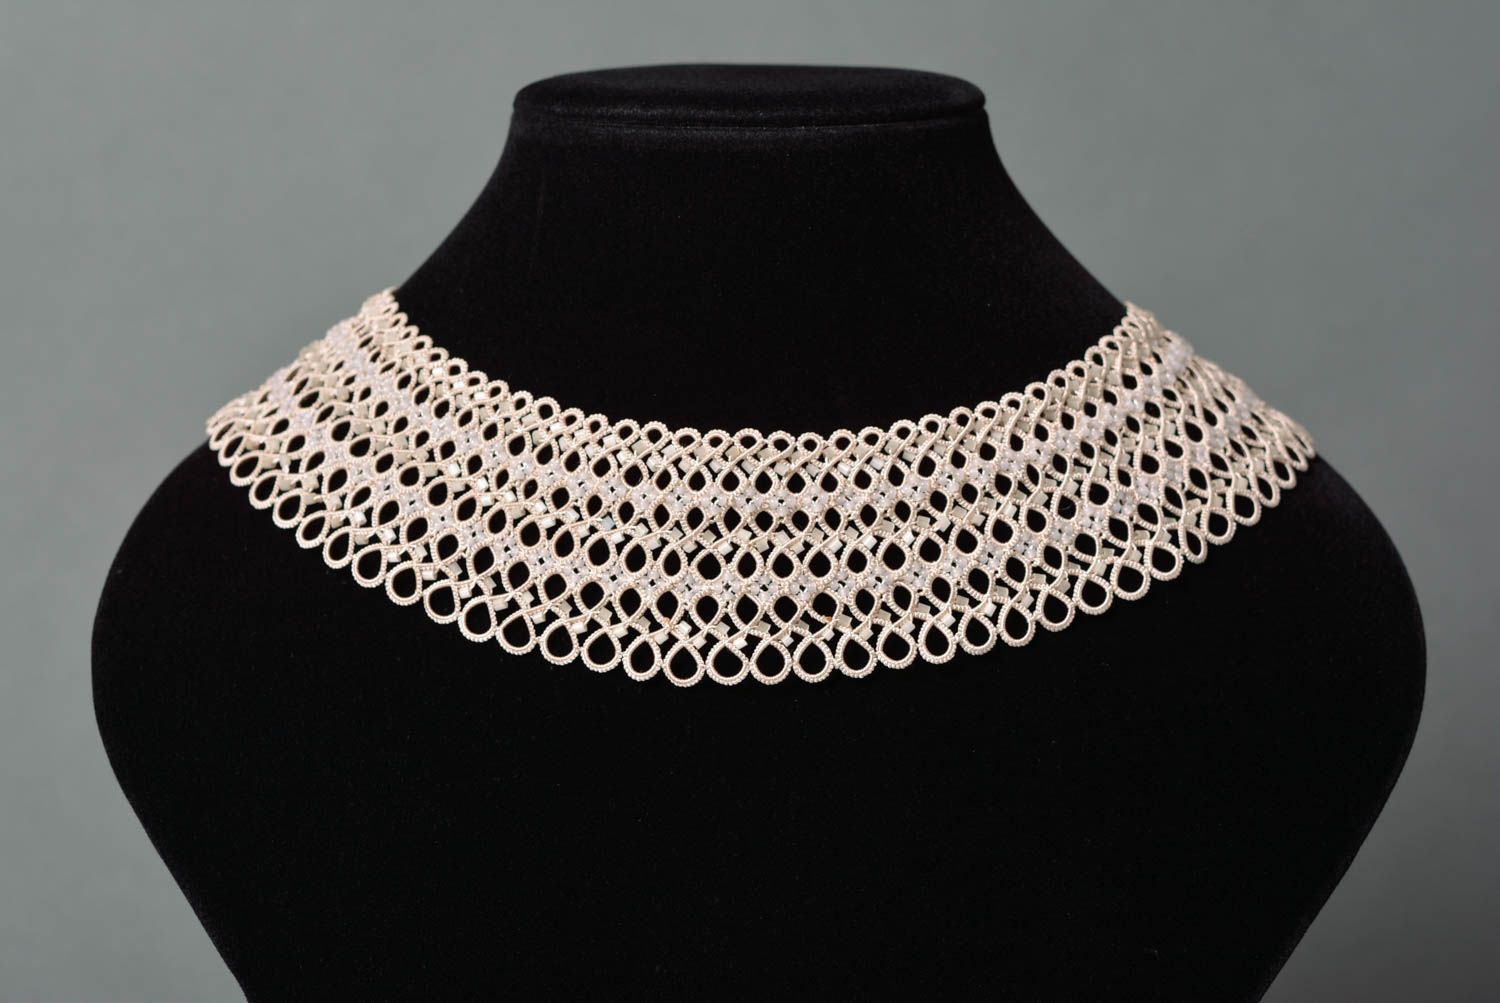 Collar necklace handmade jewelry fashion accessories gift ideas for women photo 1